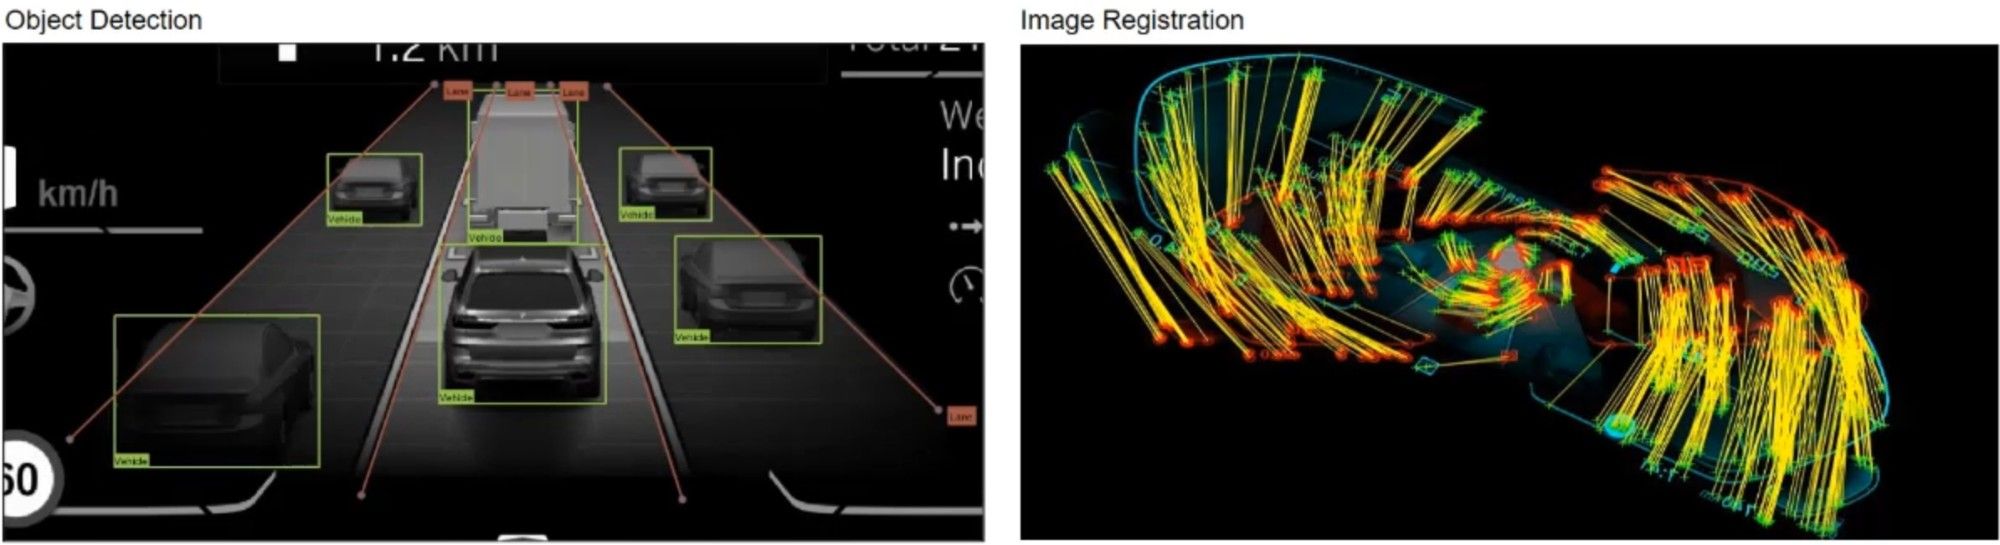 Two images. The first is a screenshot showing bounding boxes around cars for object detection. The second is an image registration showing many slanted yellow lines with green and red poles.